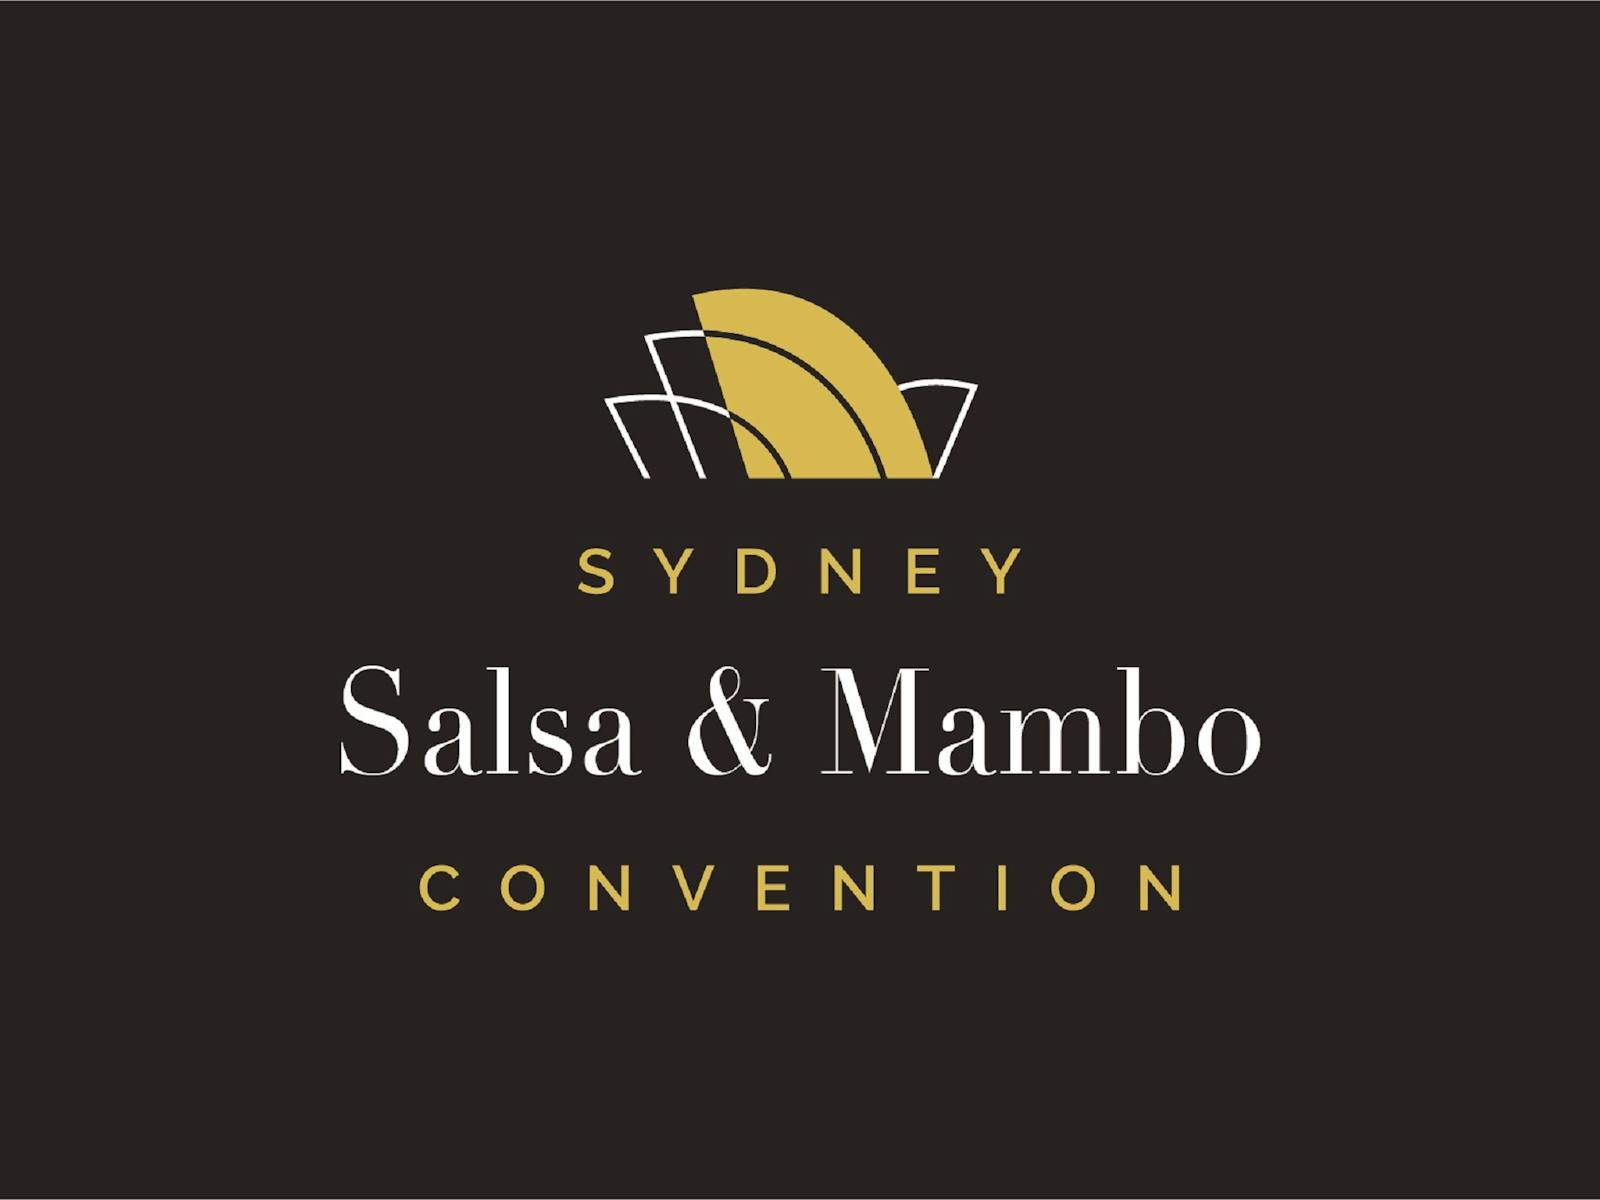 Image for Sydney Salsa and Mambo Convention